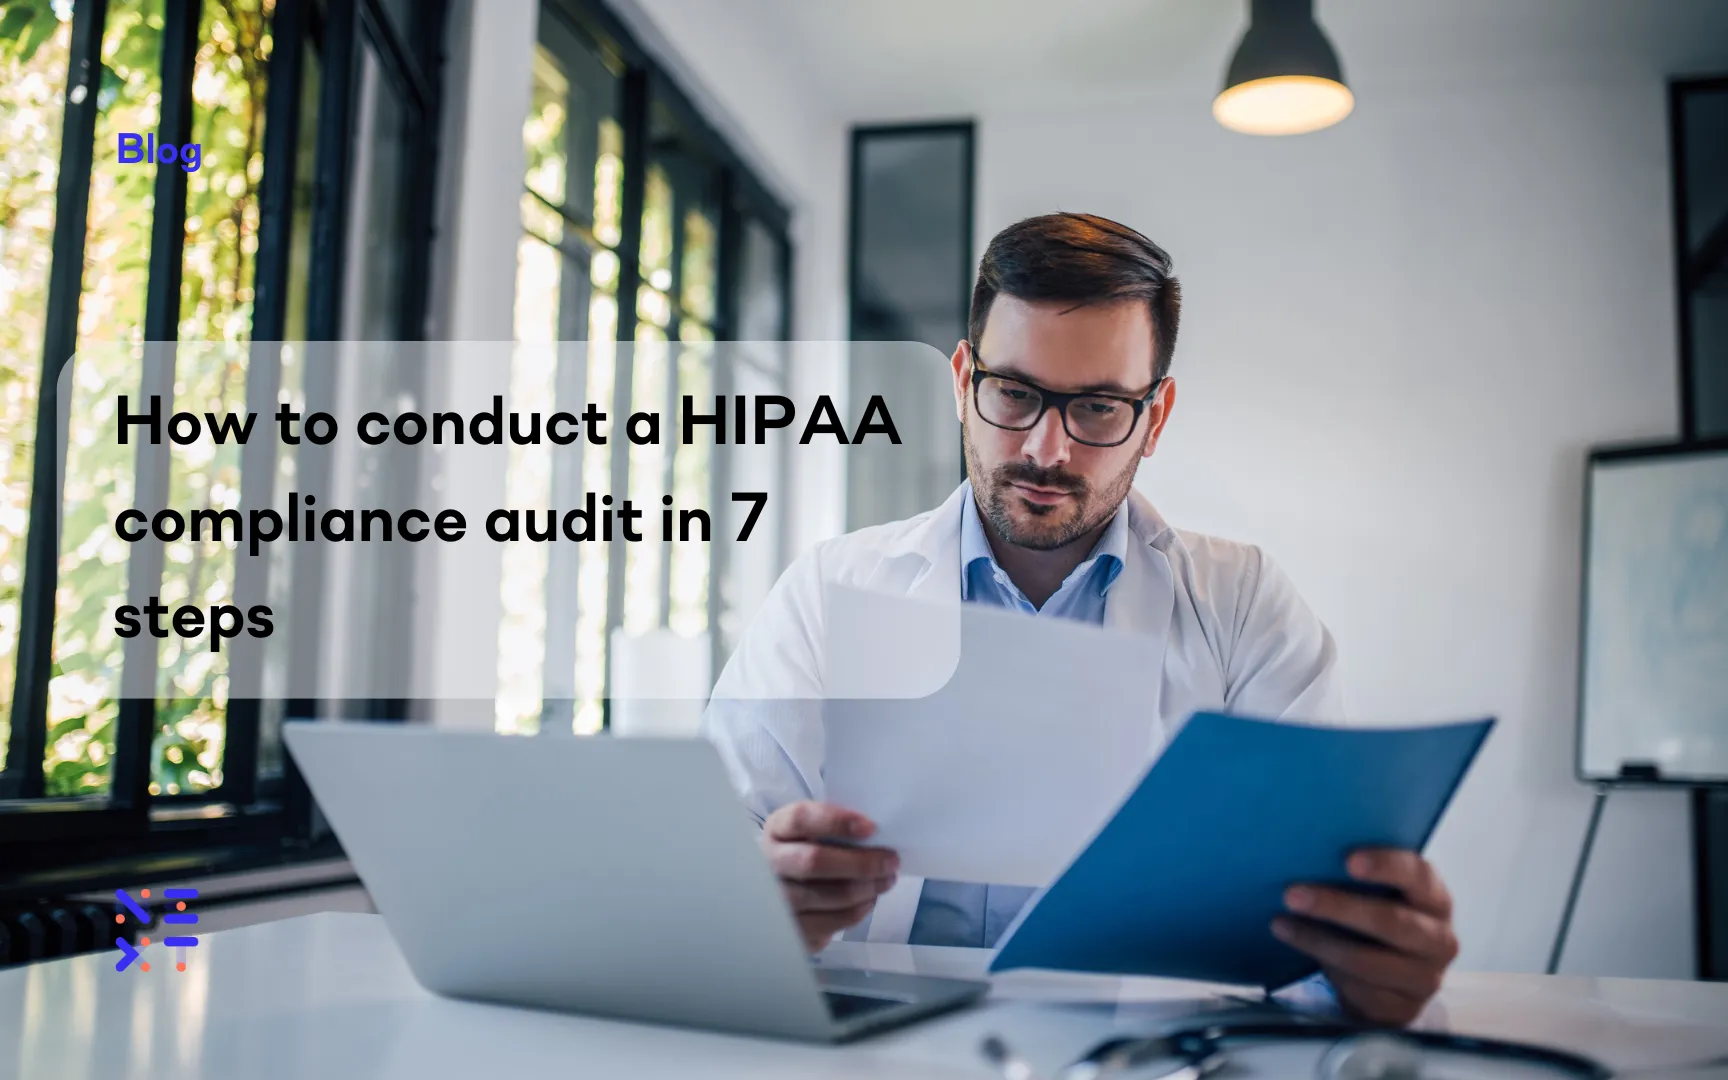 How to conduct a HIPAA compliance audit in 7 steps